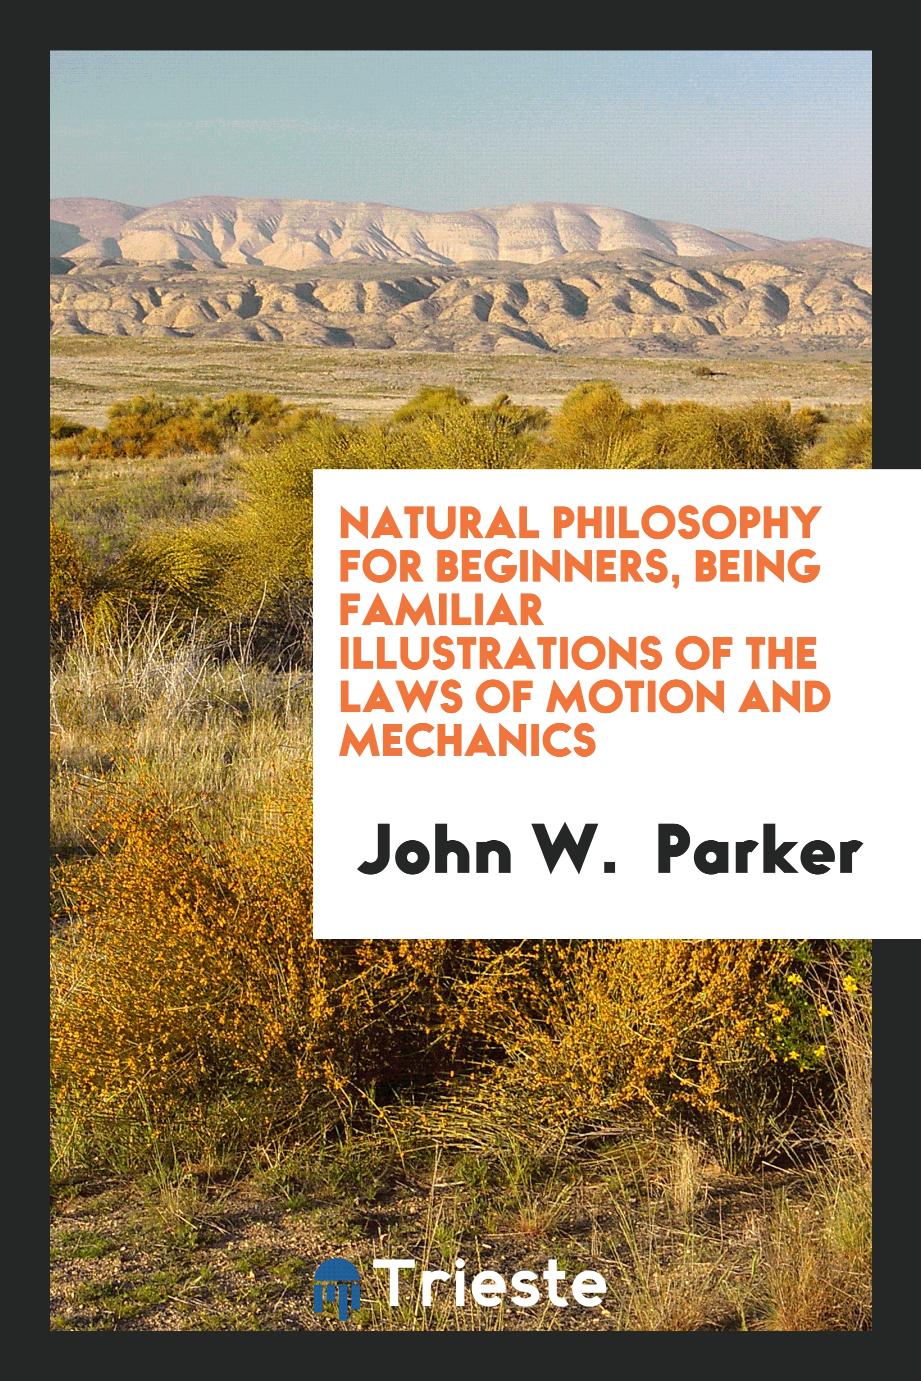 Natural Philosophy for Beginners, Being Familiar Illustrations of the Laws of Motion and Mechanics